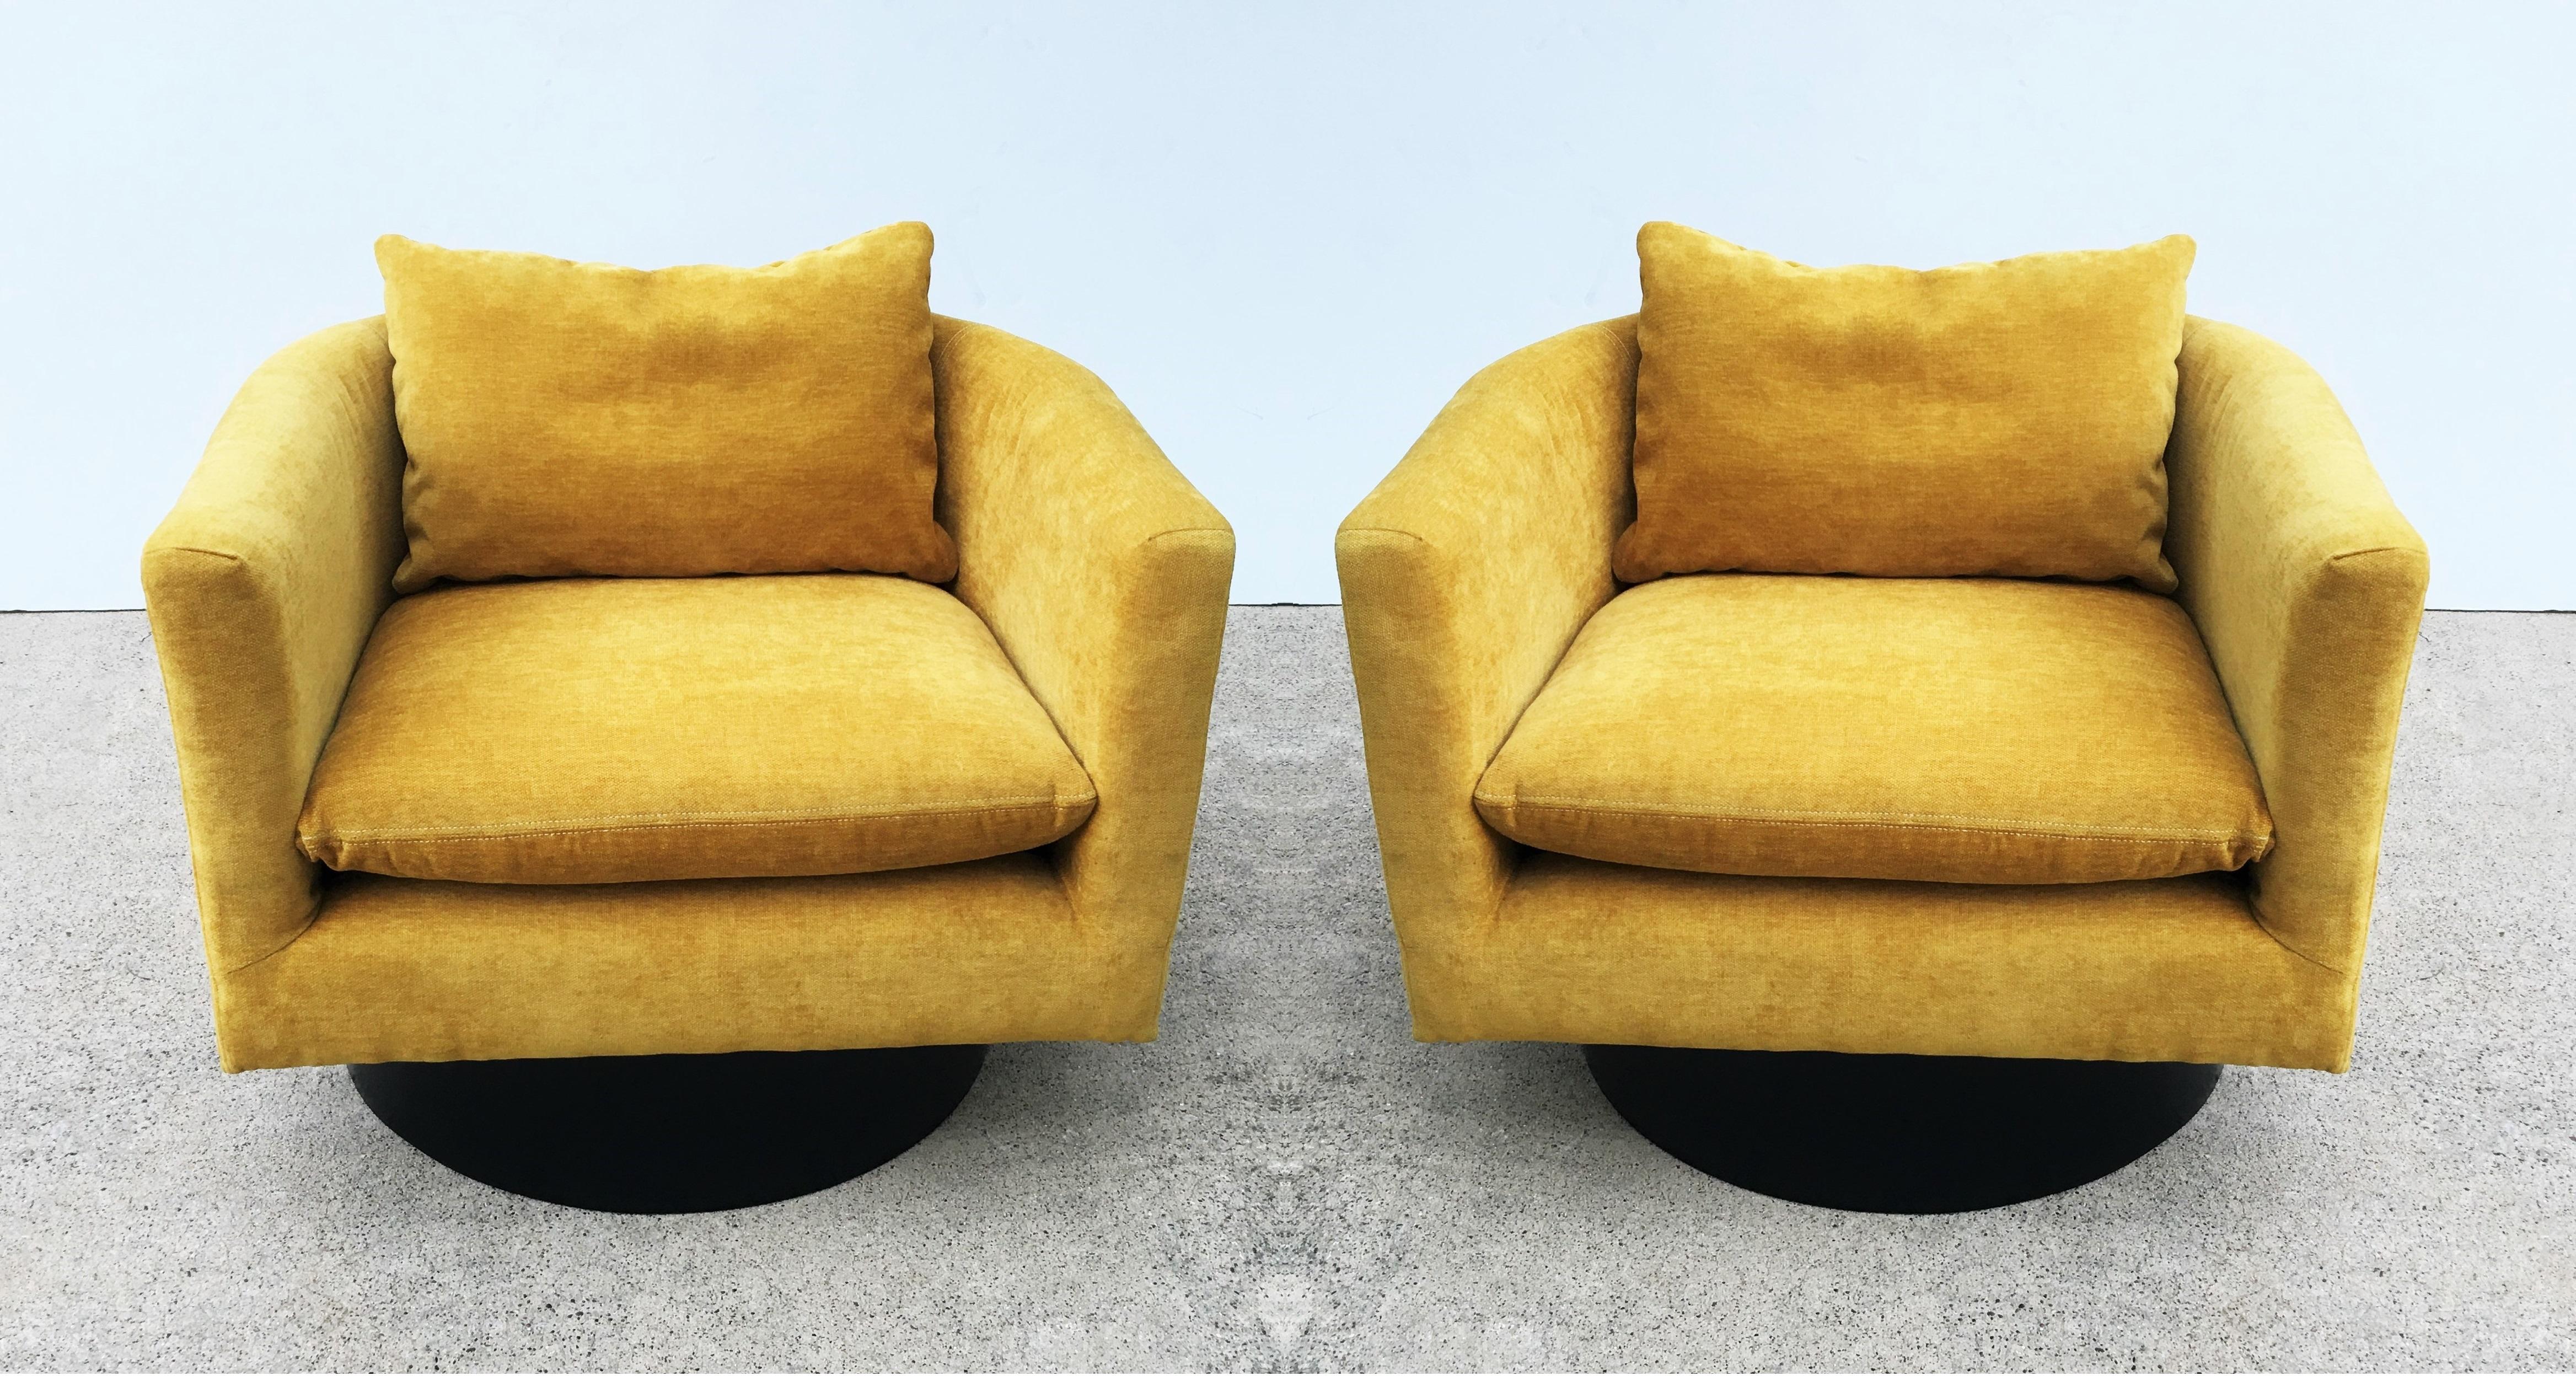 Handsome pair of very unusual swivel chairs designed by Milo Baughman, circa 1960s. One of the leading modern furniture designers of the twentieth century. His furniture is the epitome of good design. Enjoy luxurious comfort as you lounge in the